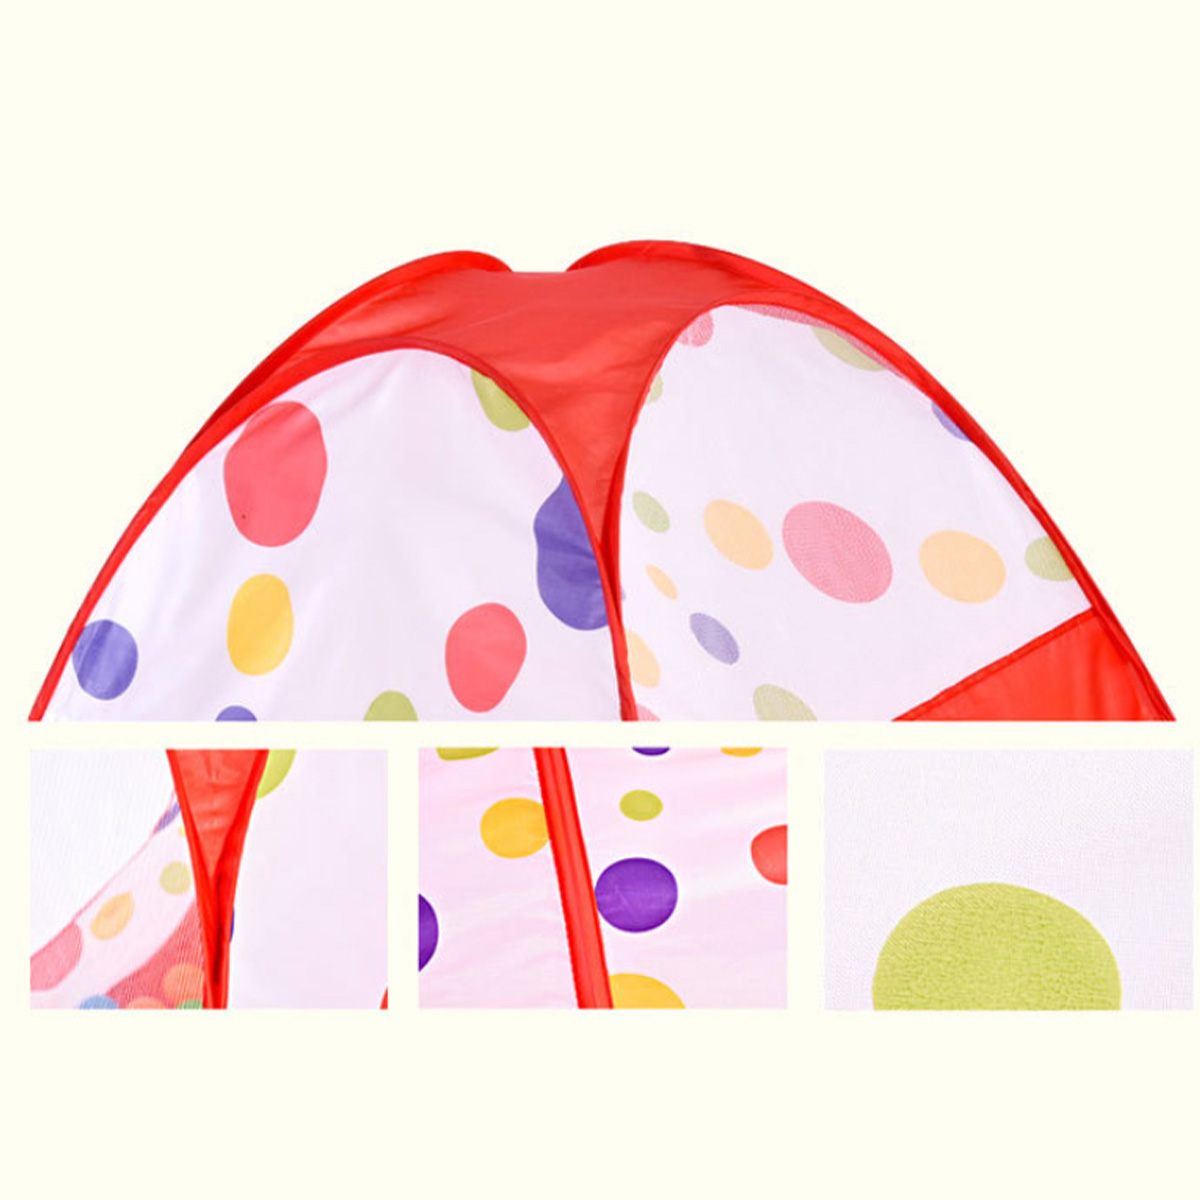 Baby-Creeping-Tunnel-Tent-Play-Game-Toys-for-0-3-Year-Old-Kids-Perfect-Gift-1676970-9